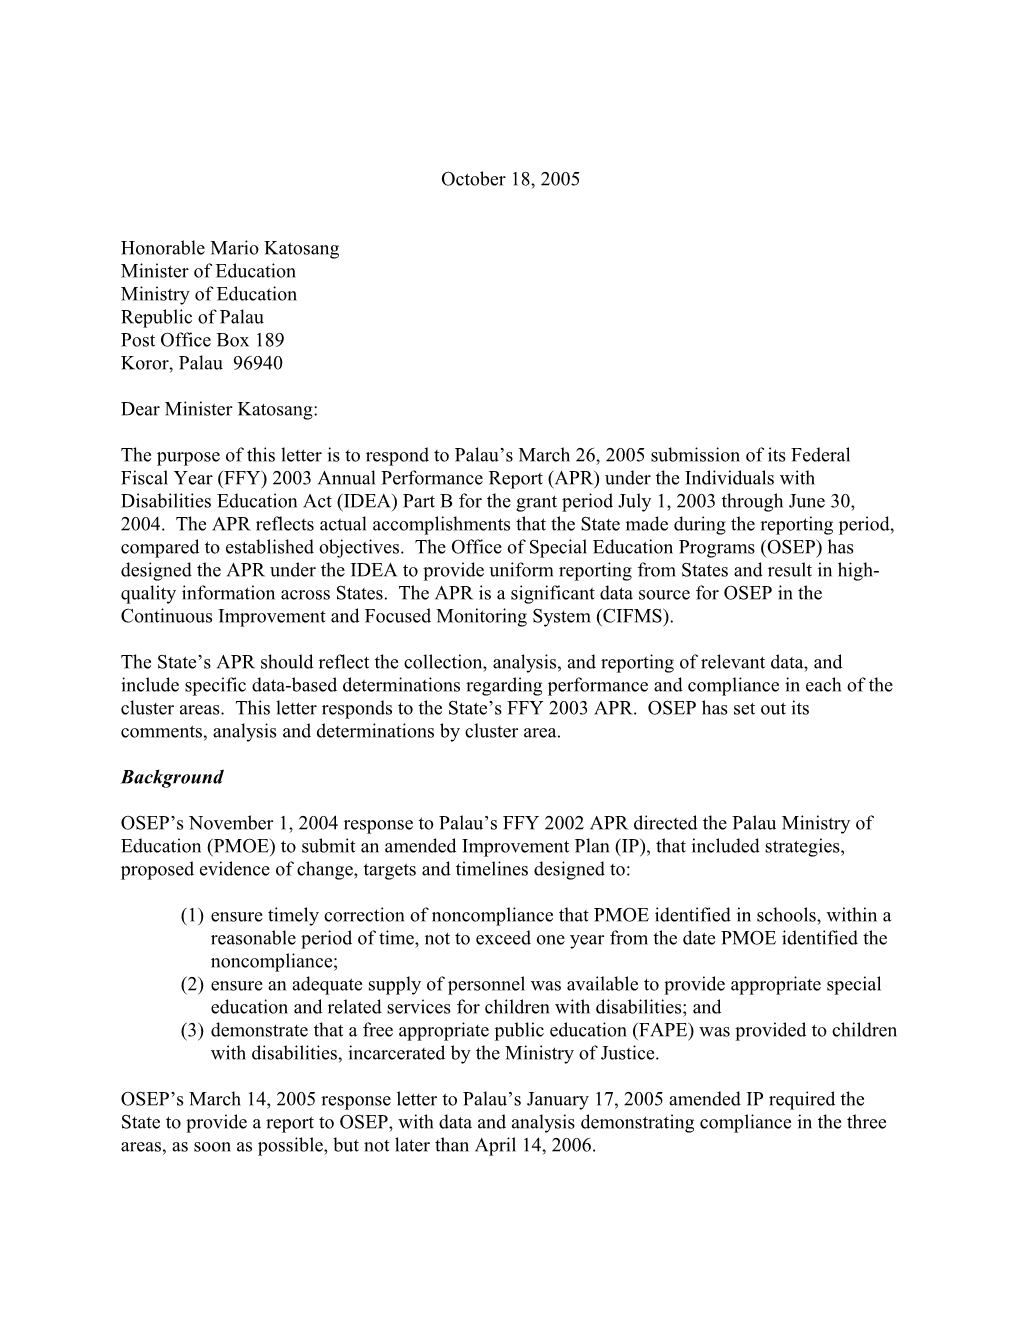 Federal Republic of Palau Part B APR Letter for Grant Year 2003-2004 (Msword)